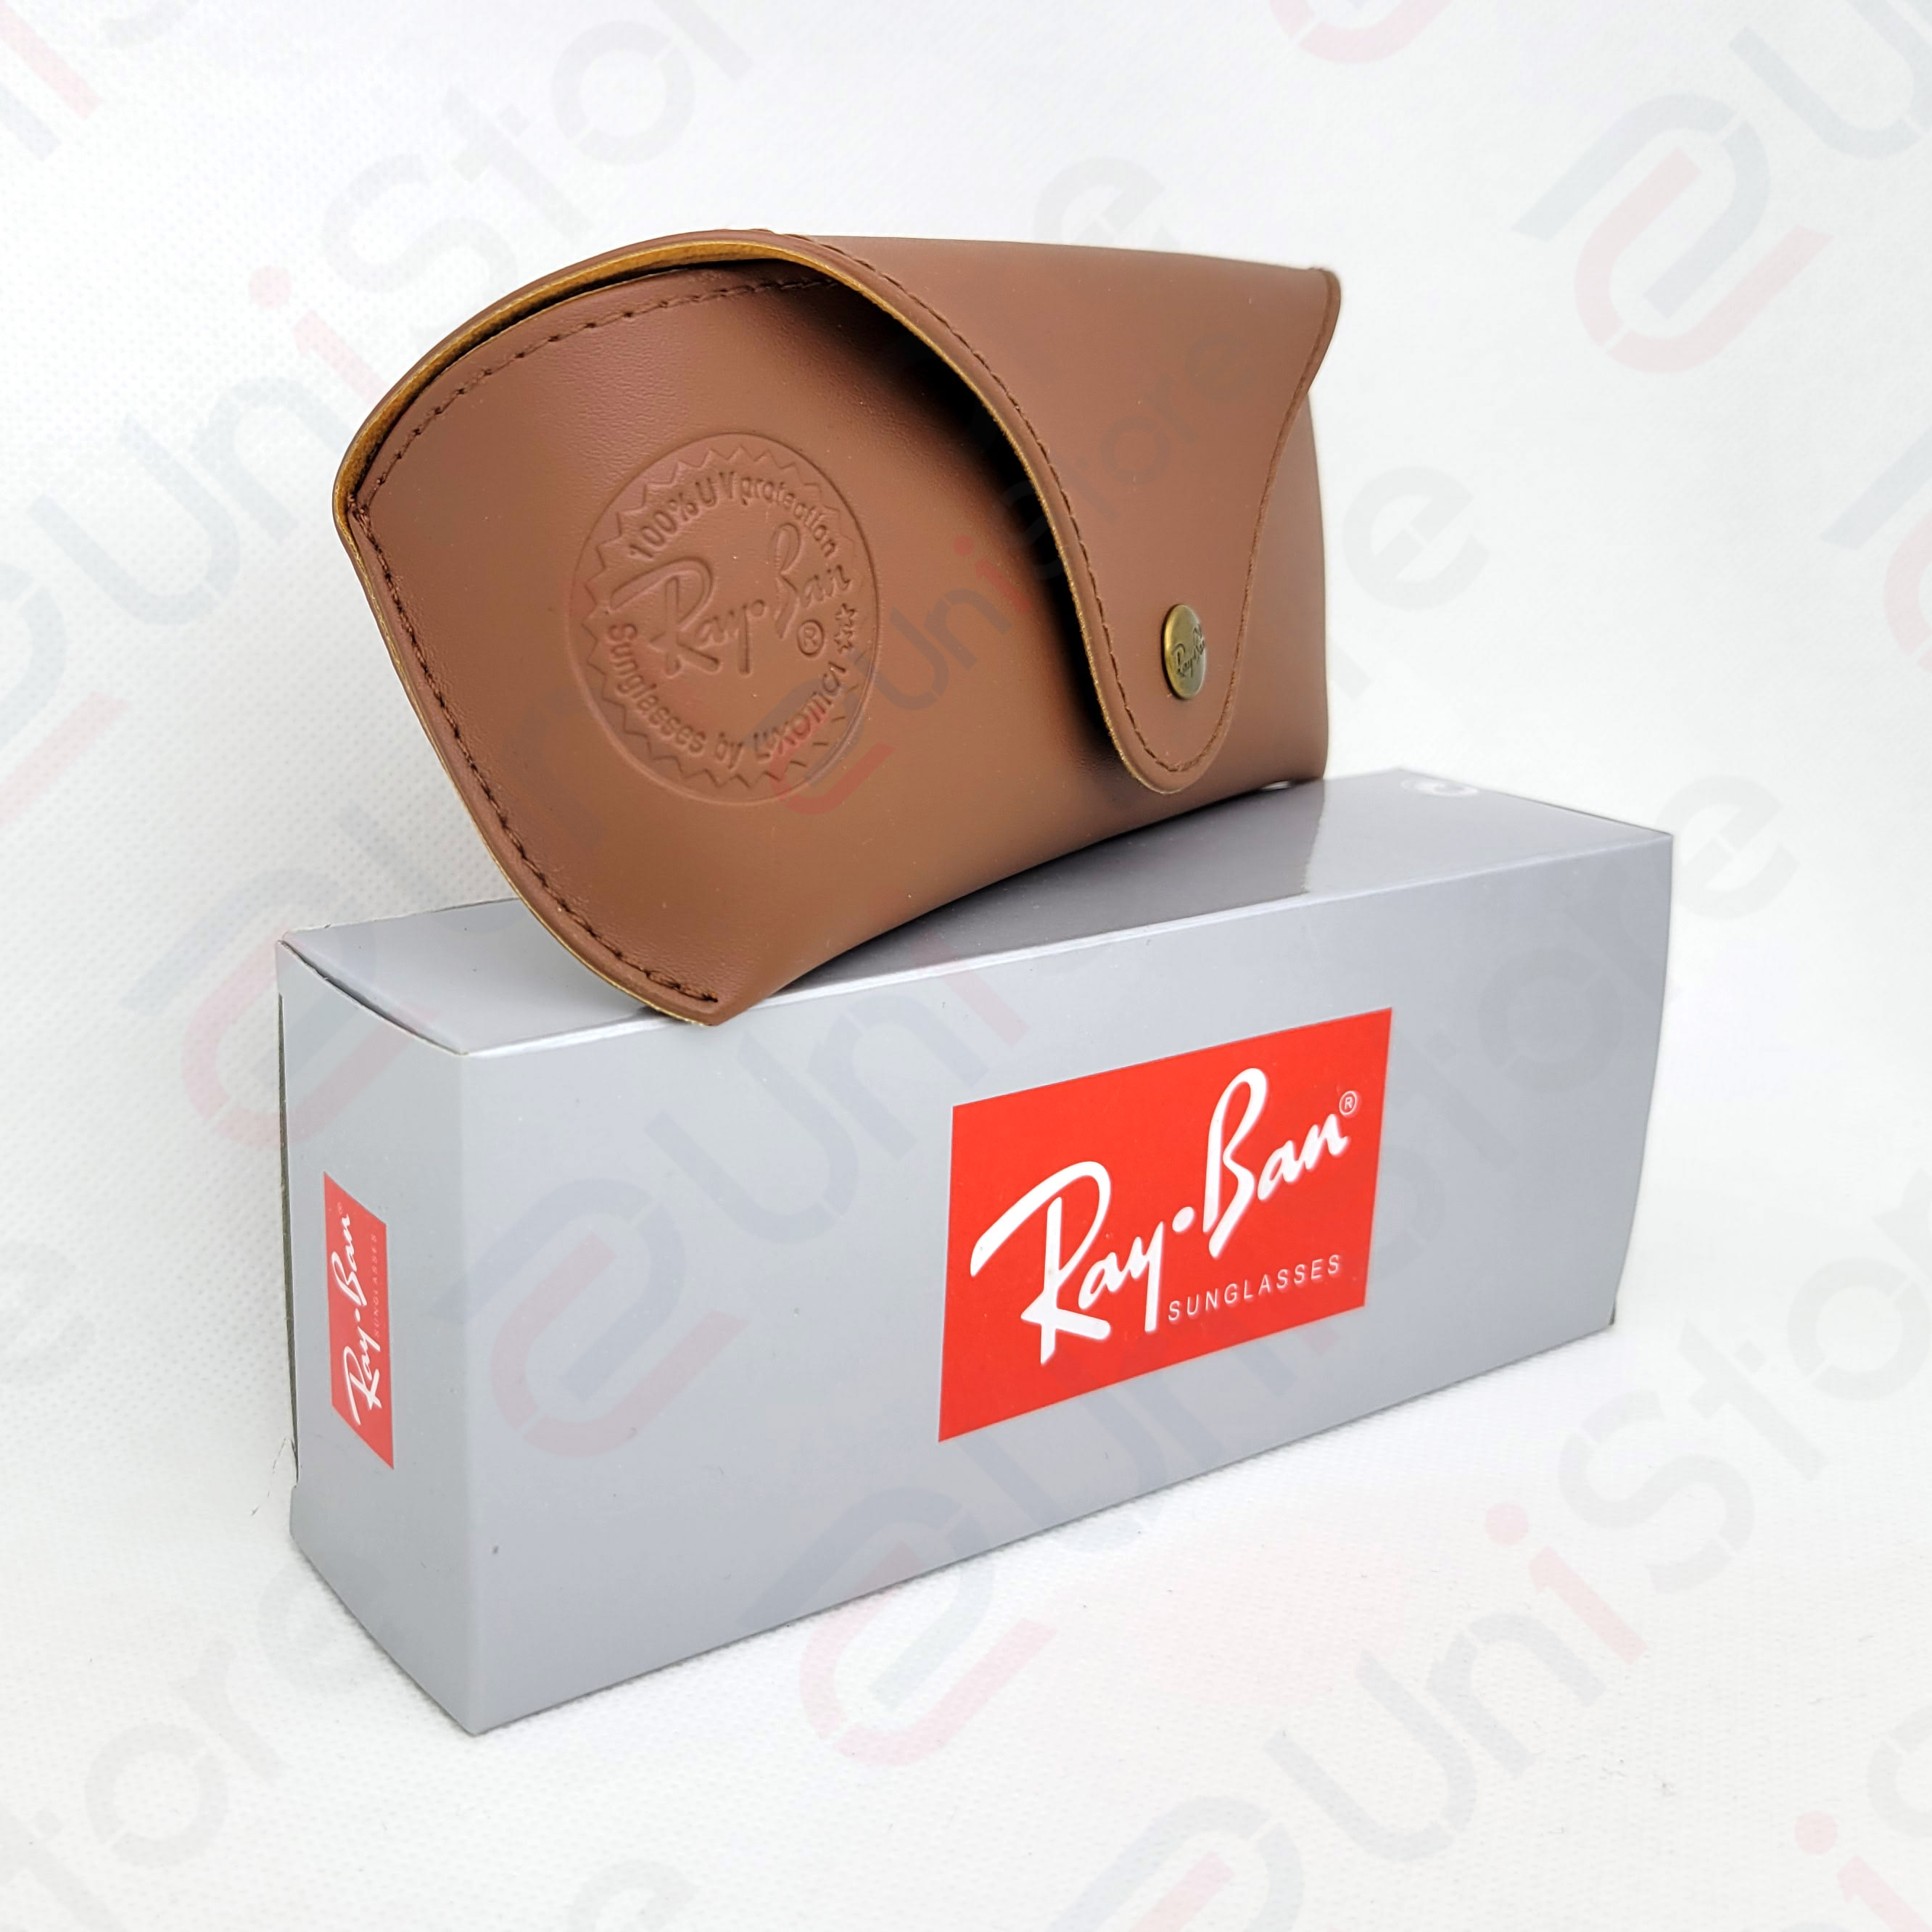 Ray-Ban SPECIAL EDITION LEATHER CASE 